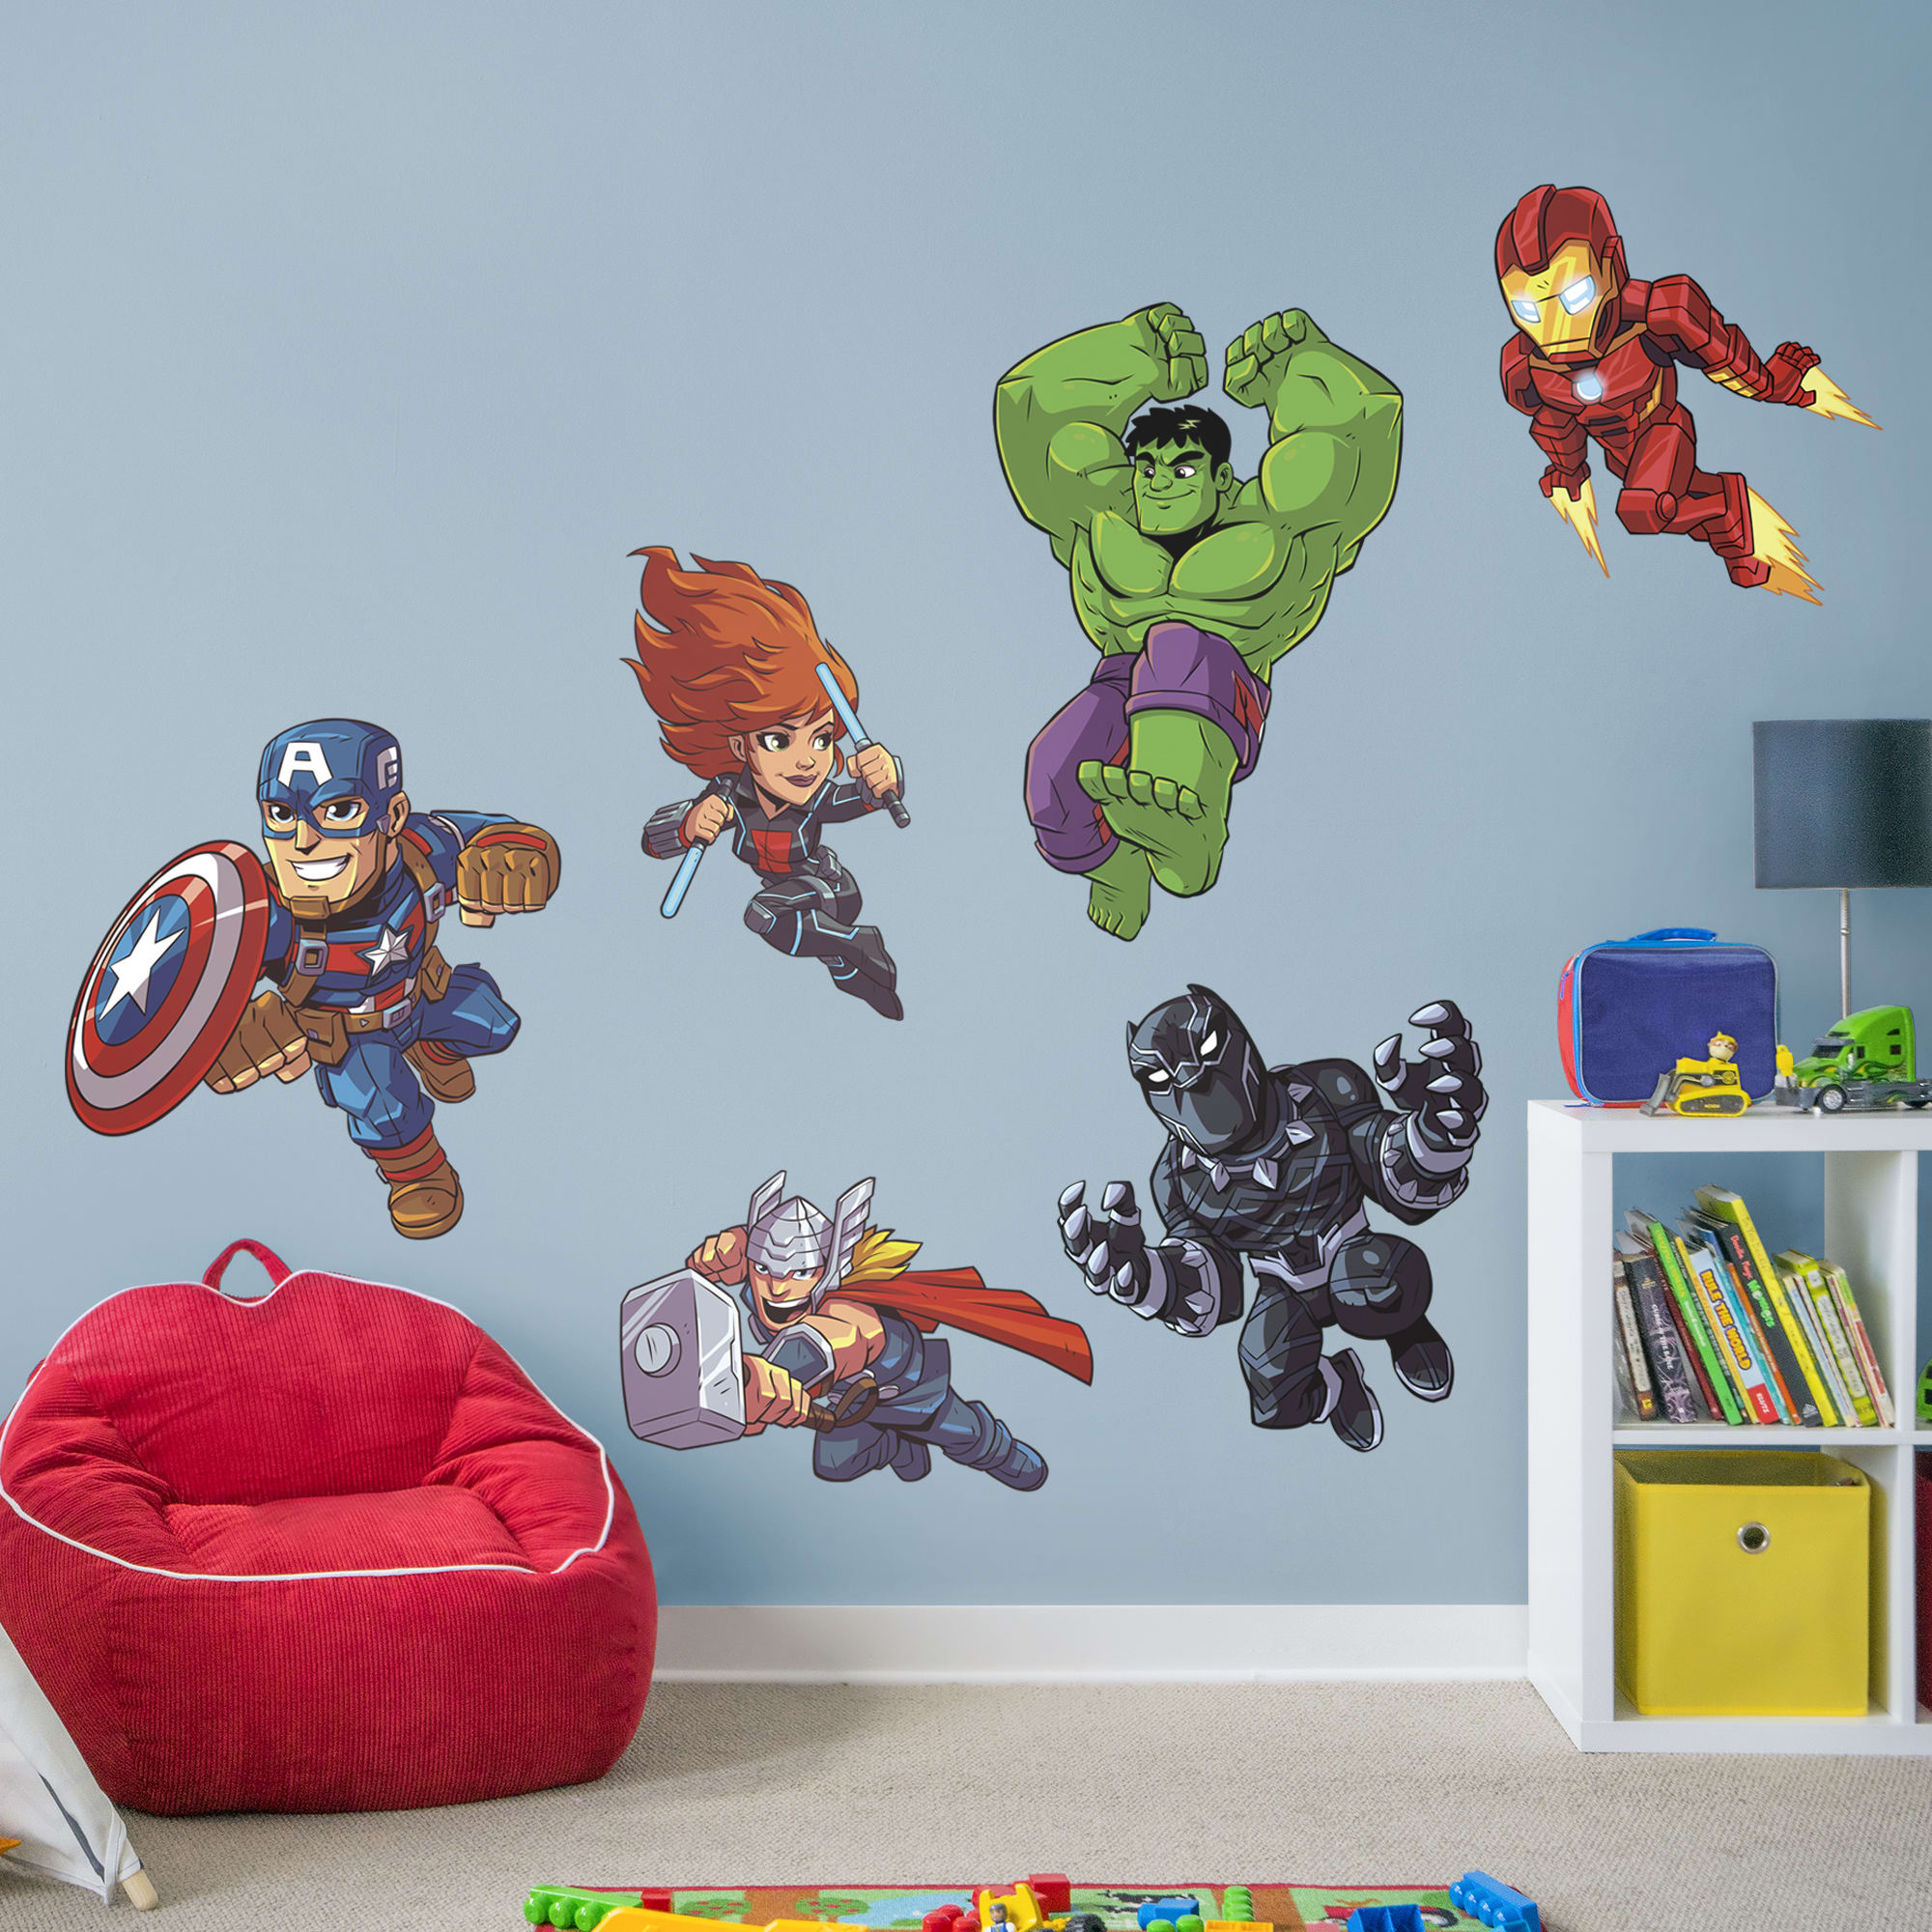 Avengers Assemble: Marvel Super Hero Adventures Collection - Officially Licensed Removable Wall Decal 22.0"W x 25.0"H by Fathead